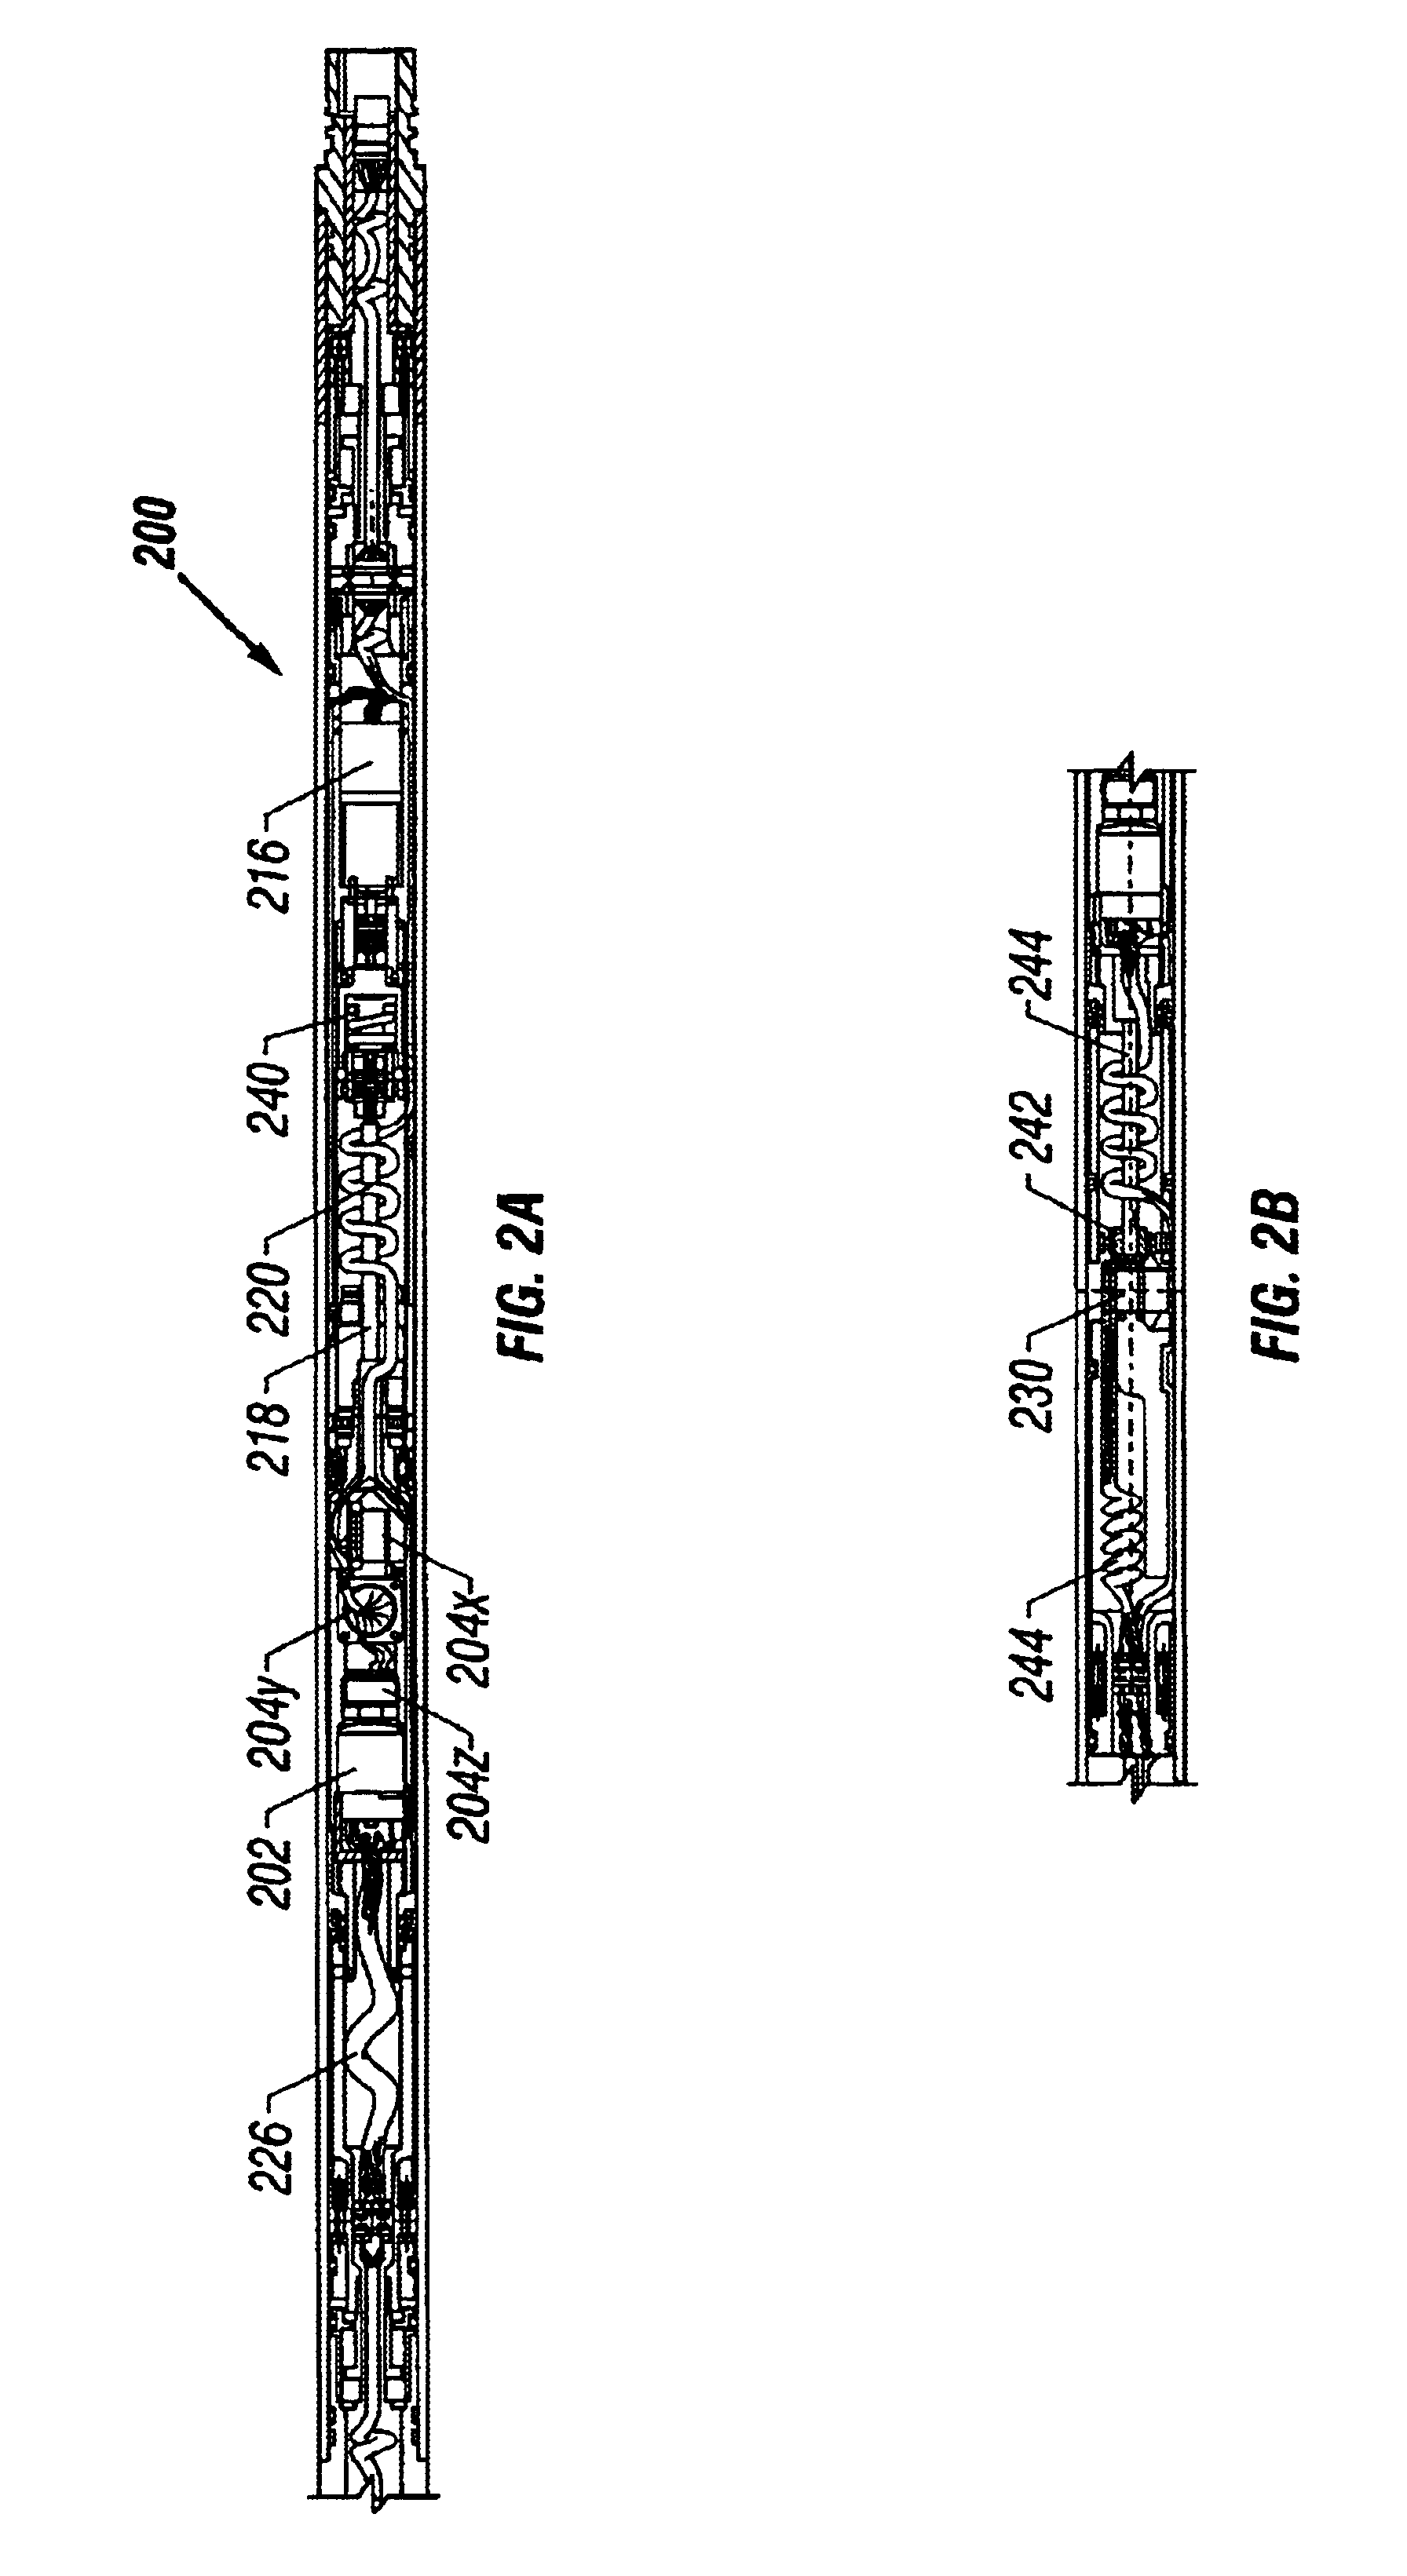 Use of MWD assembly for multiple-well drilling